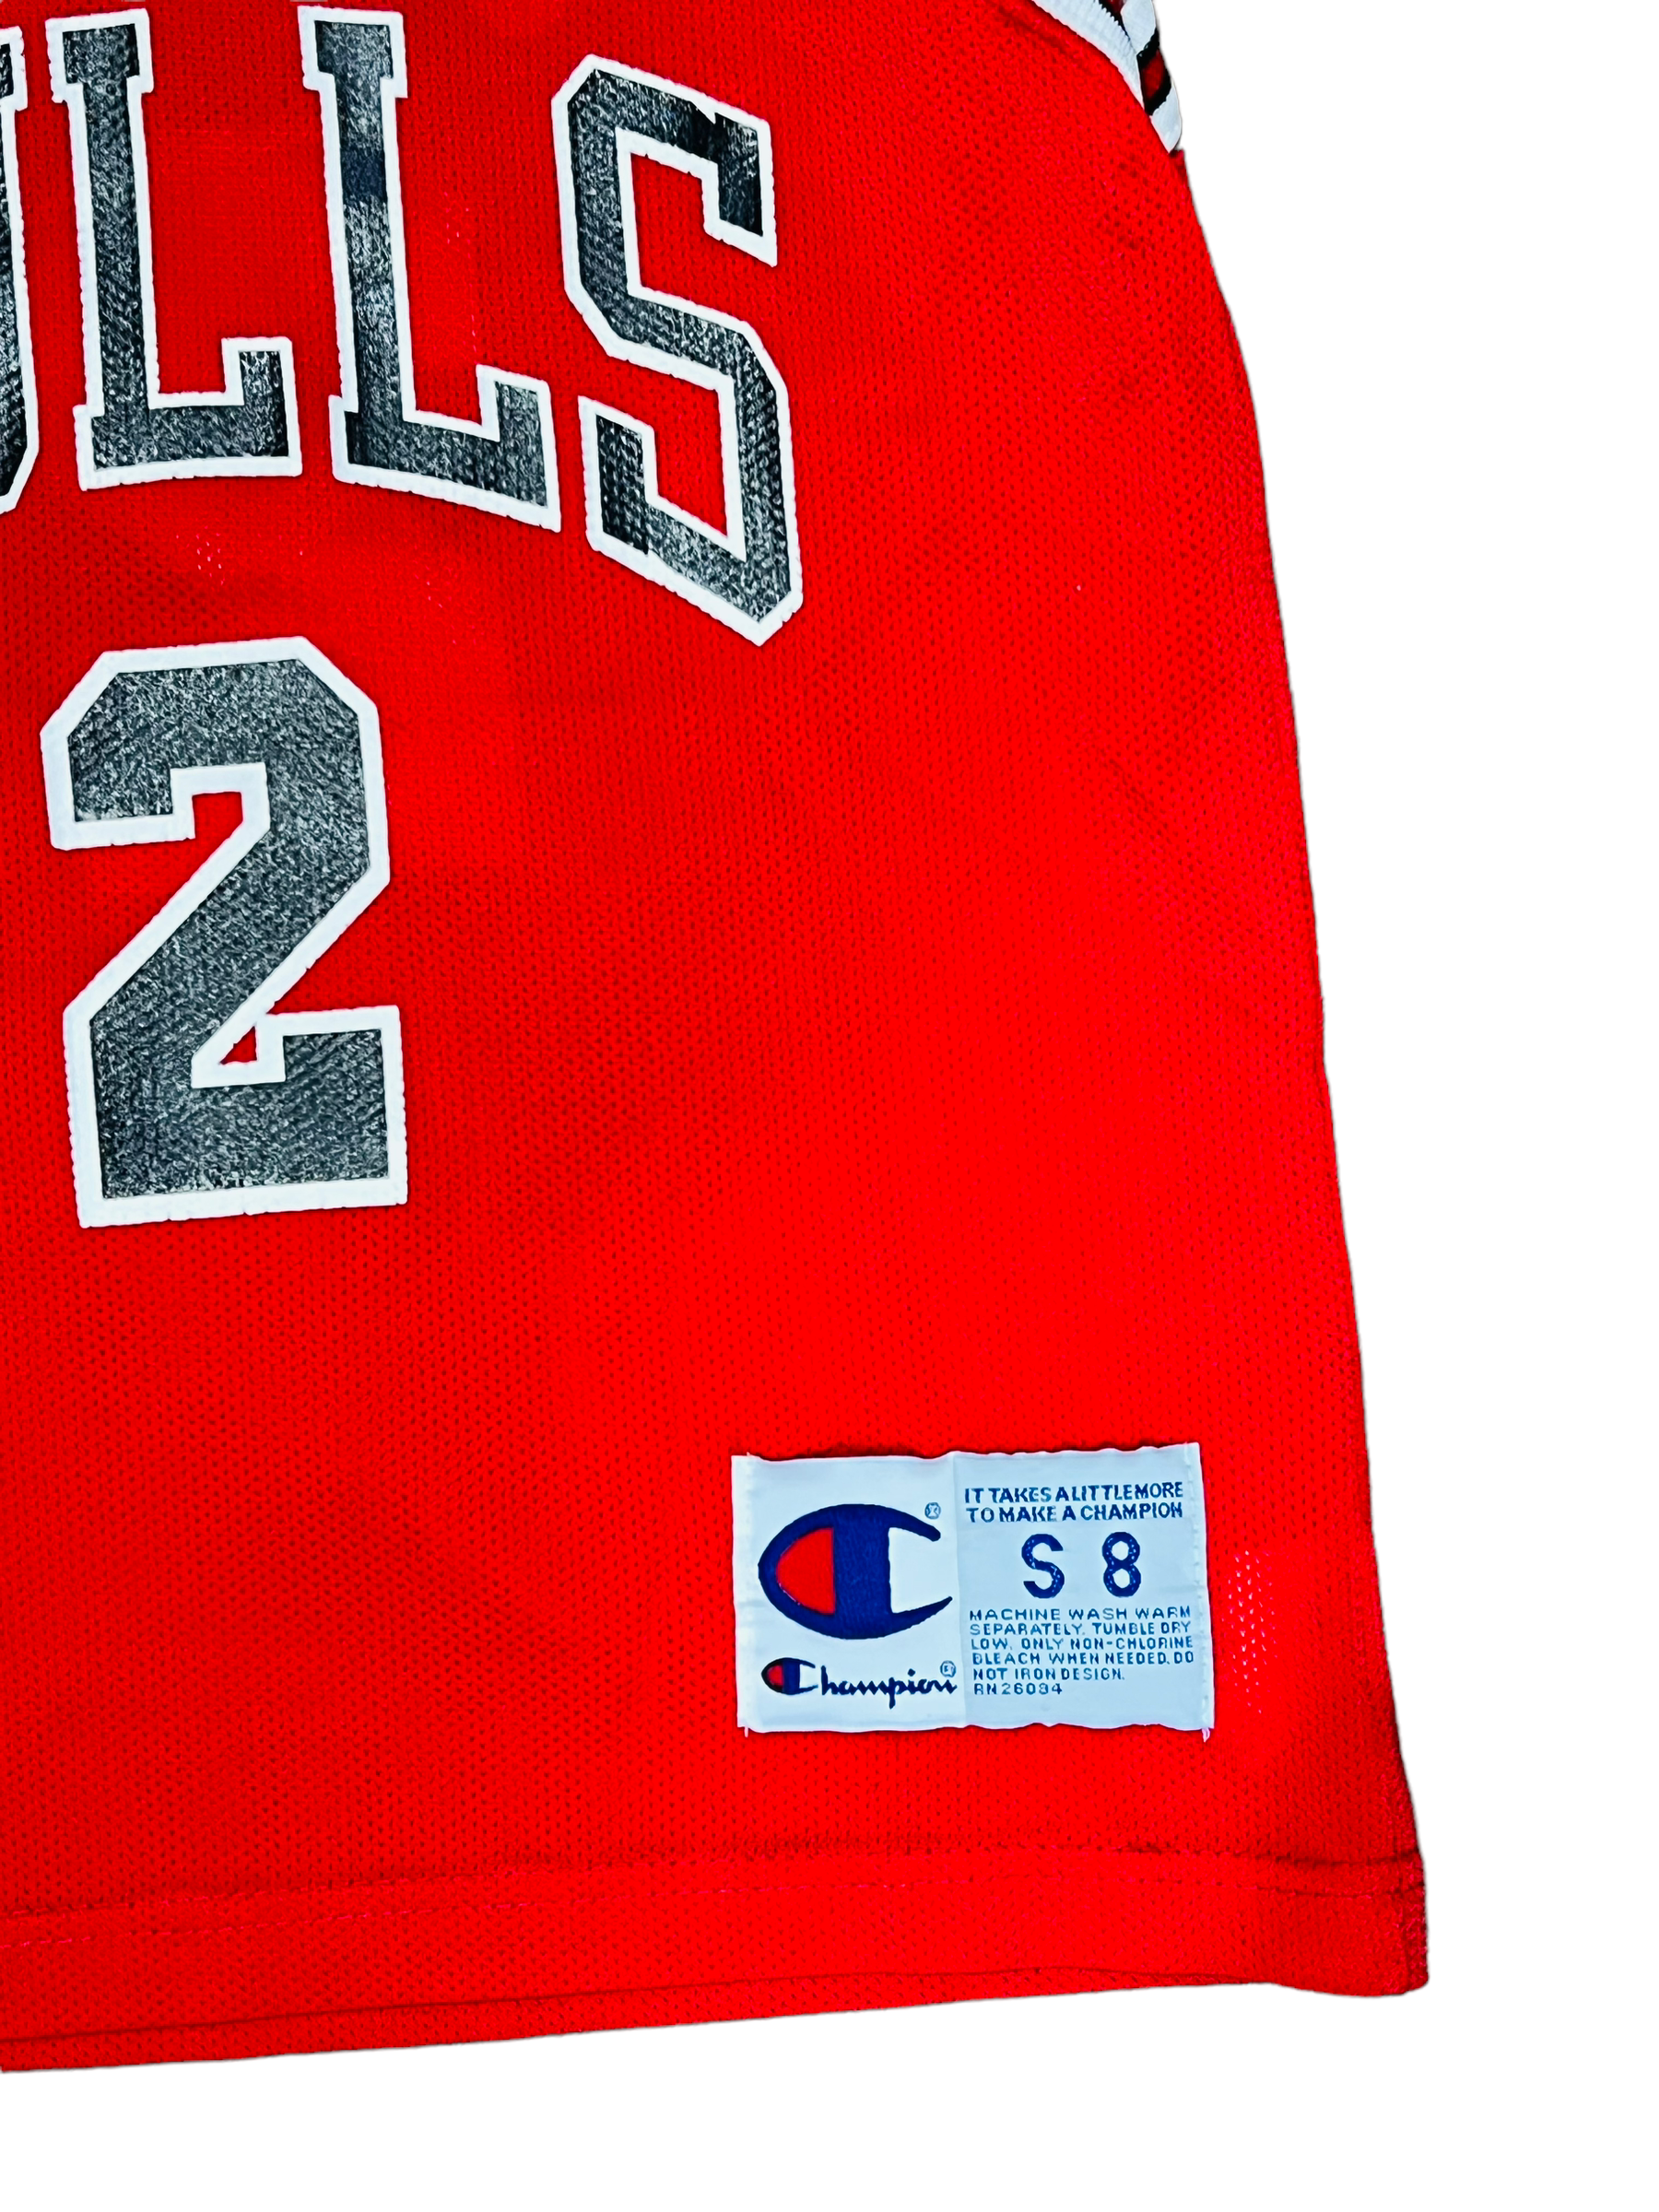 EDDIE CURRY CHICAGO BULLS VINTAGE 2000'S CHAMPION JERSEY YOUTH SMALL -  Bucks County Baseball Co.